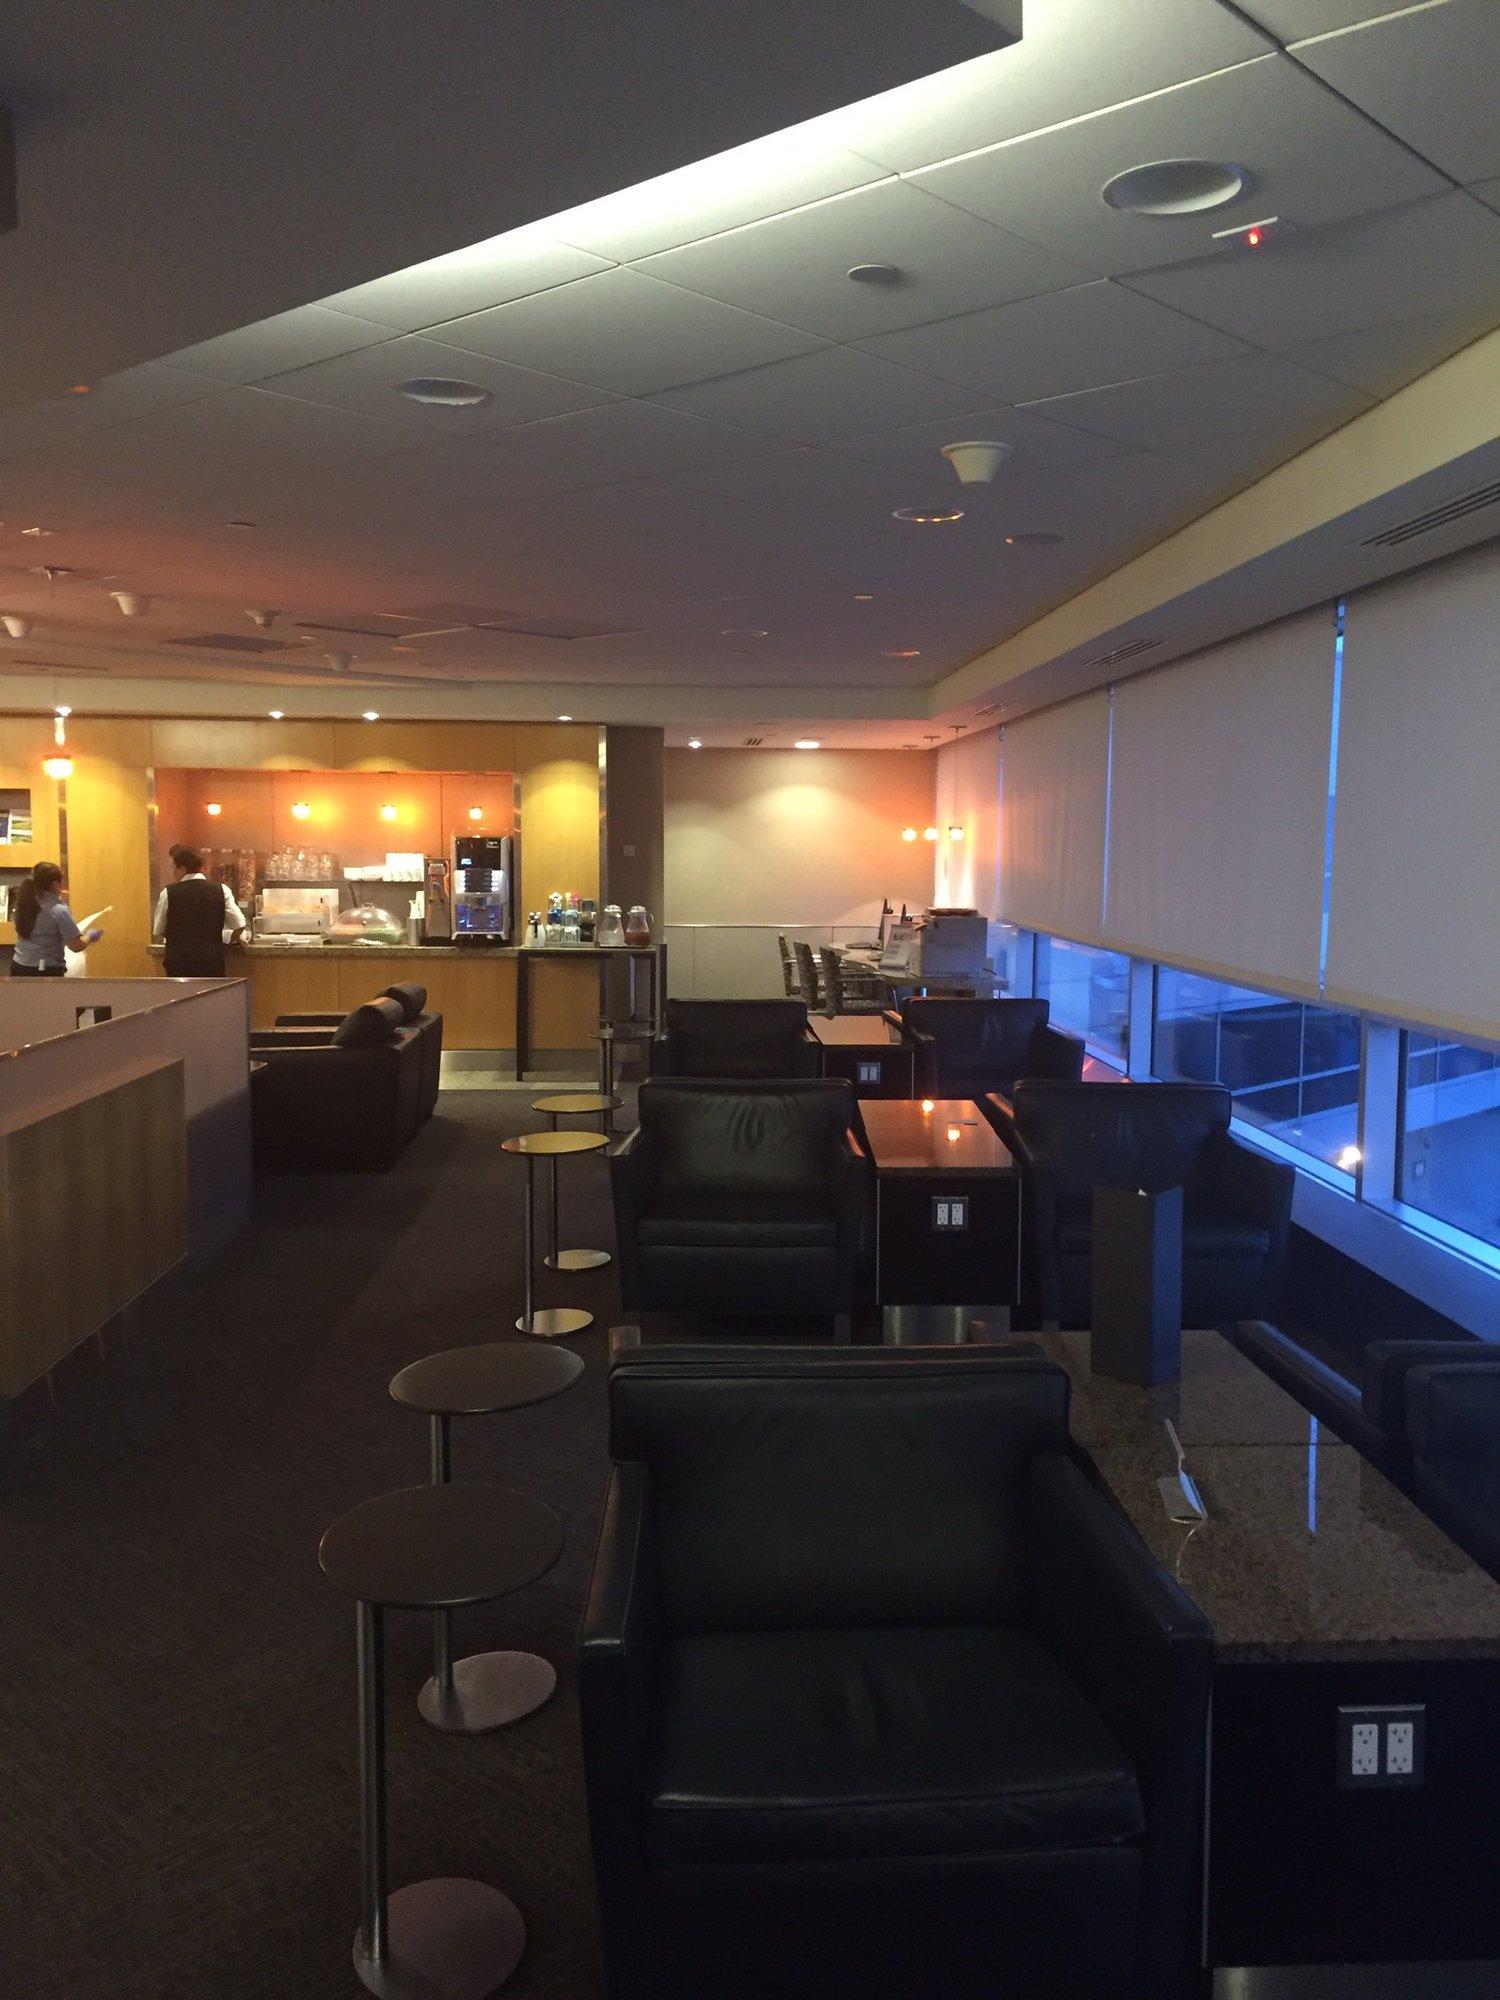 American Airlines Admirals Club image 15 of 25